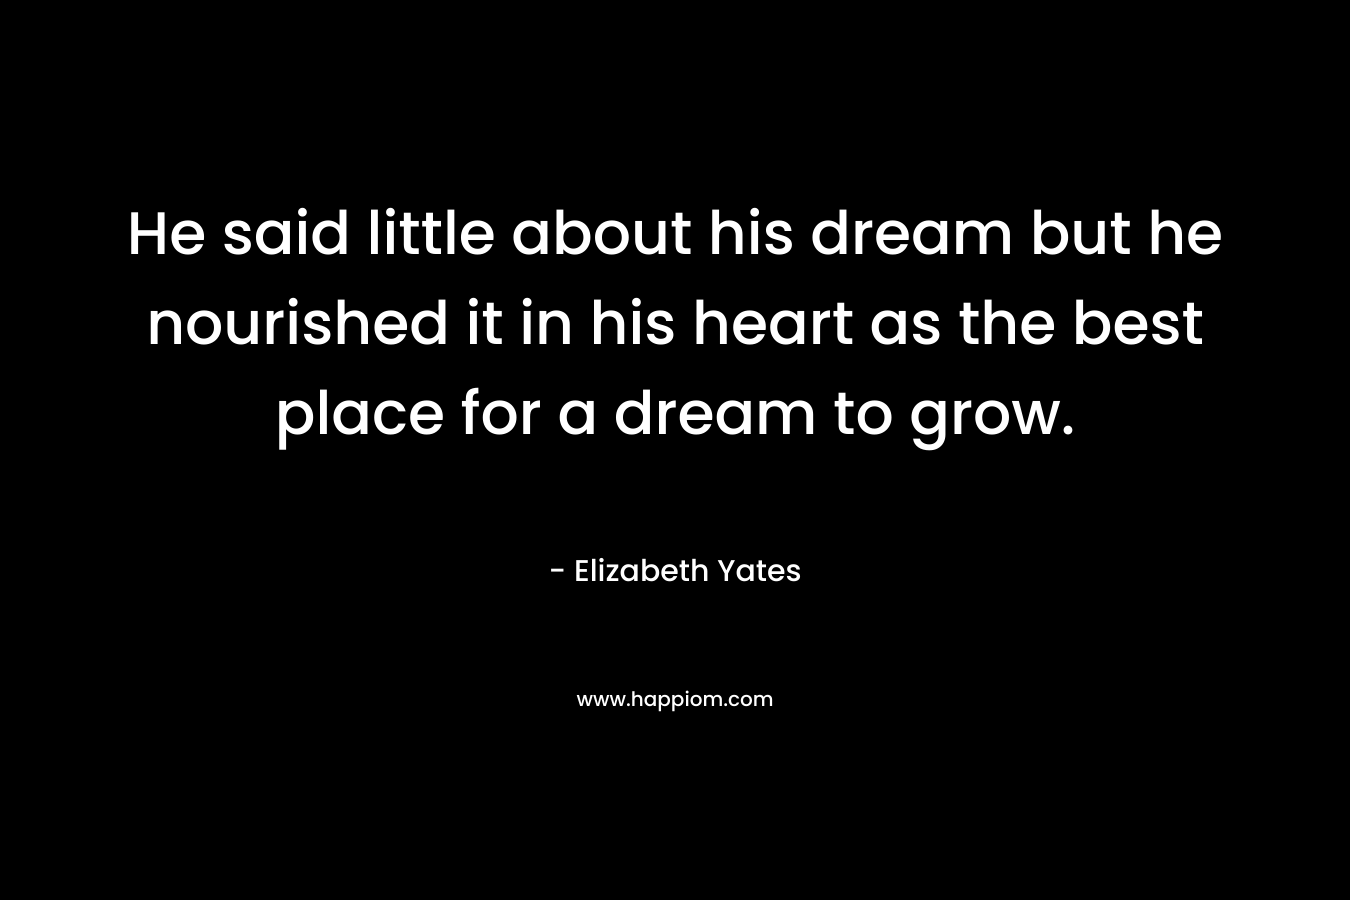 He said little about his dream but he nourished it in his heart as the best place for a dream to grow. – Elizabeth Yates